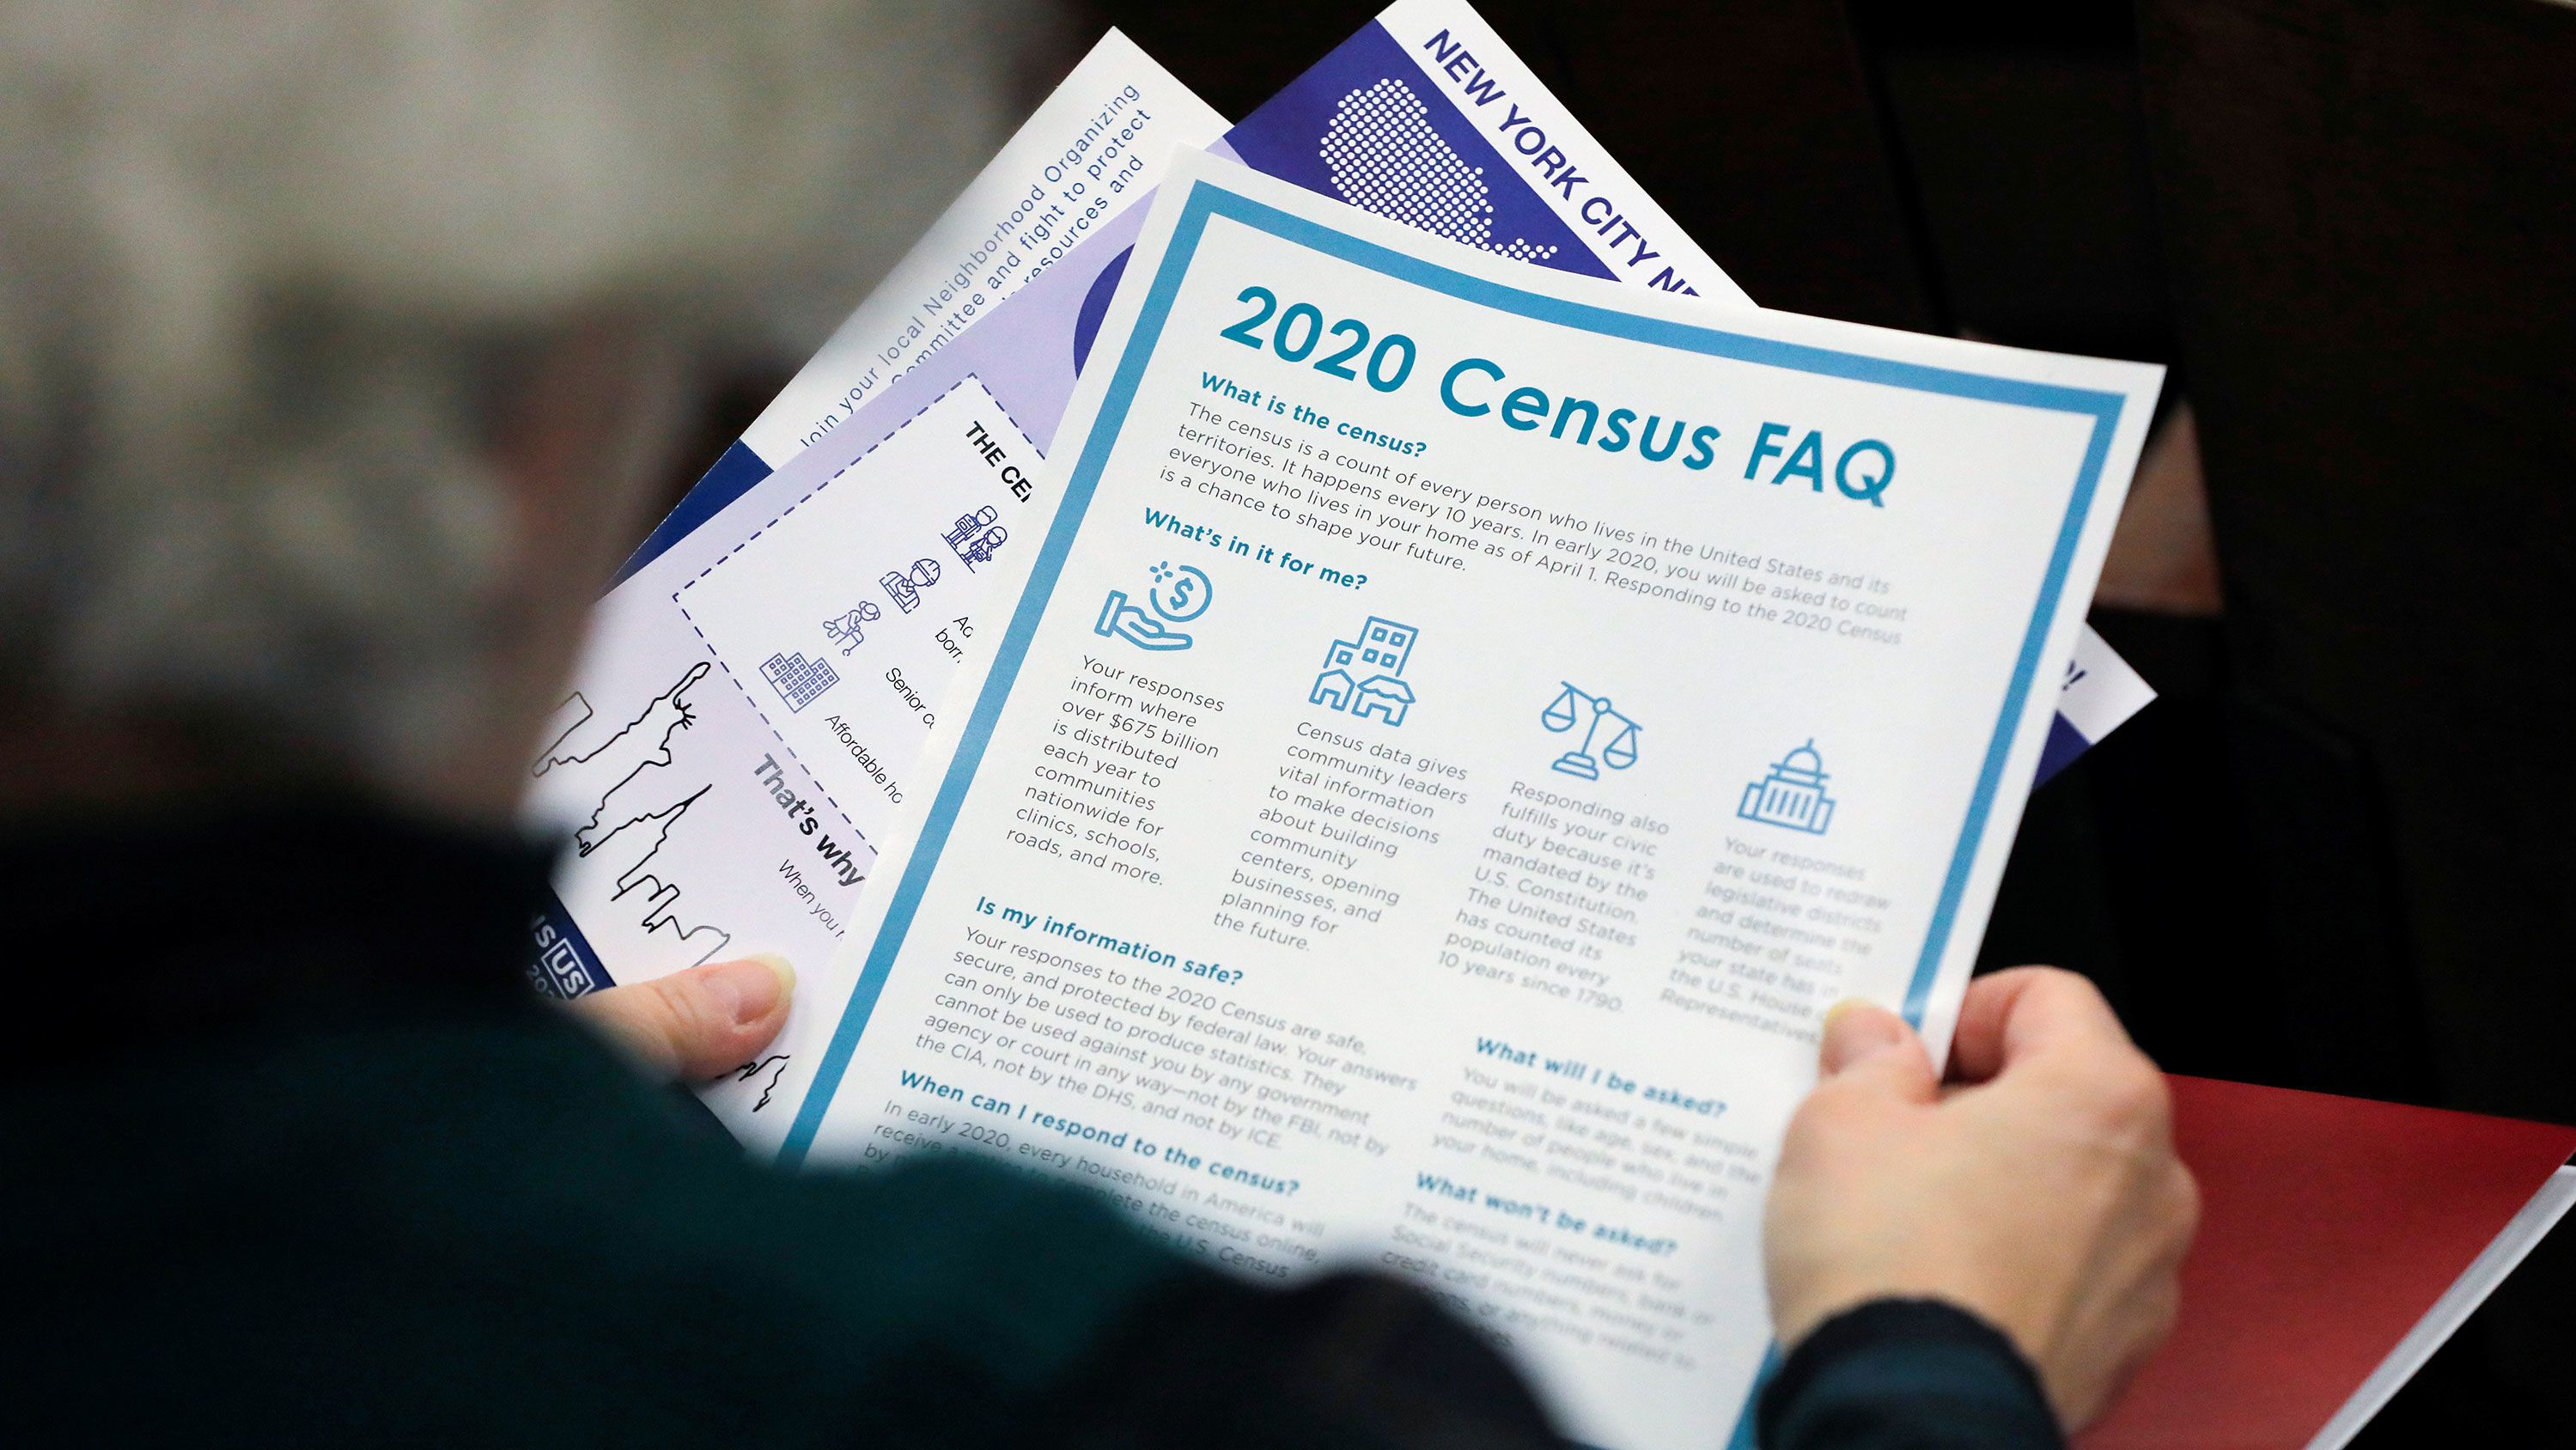 In this February 22, 2020, file photo, a person holds census information at a Census Town Hall at the Louis Armstrong Middle School in Queens, New York.